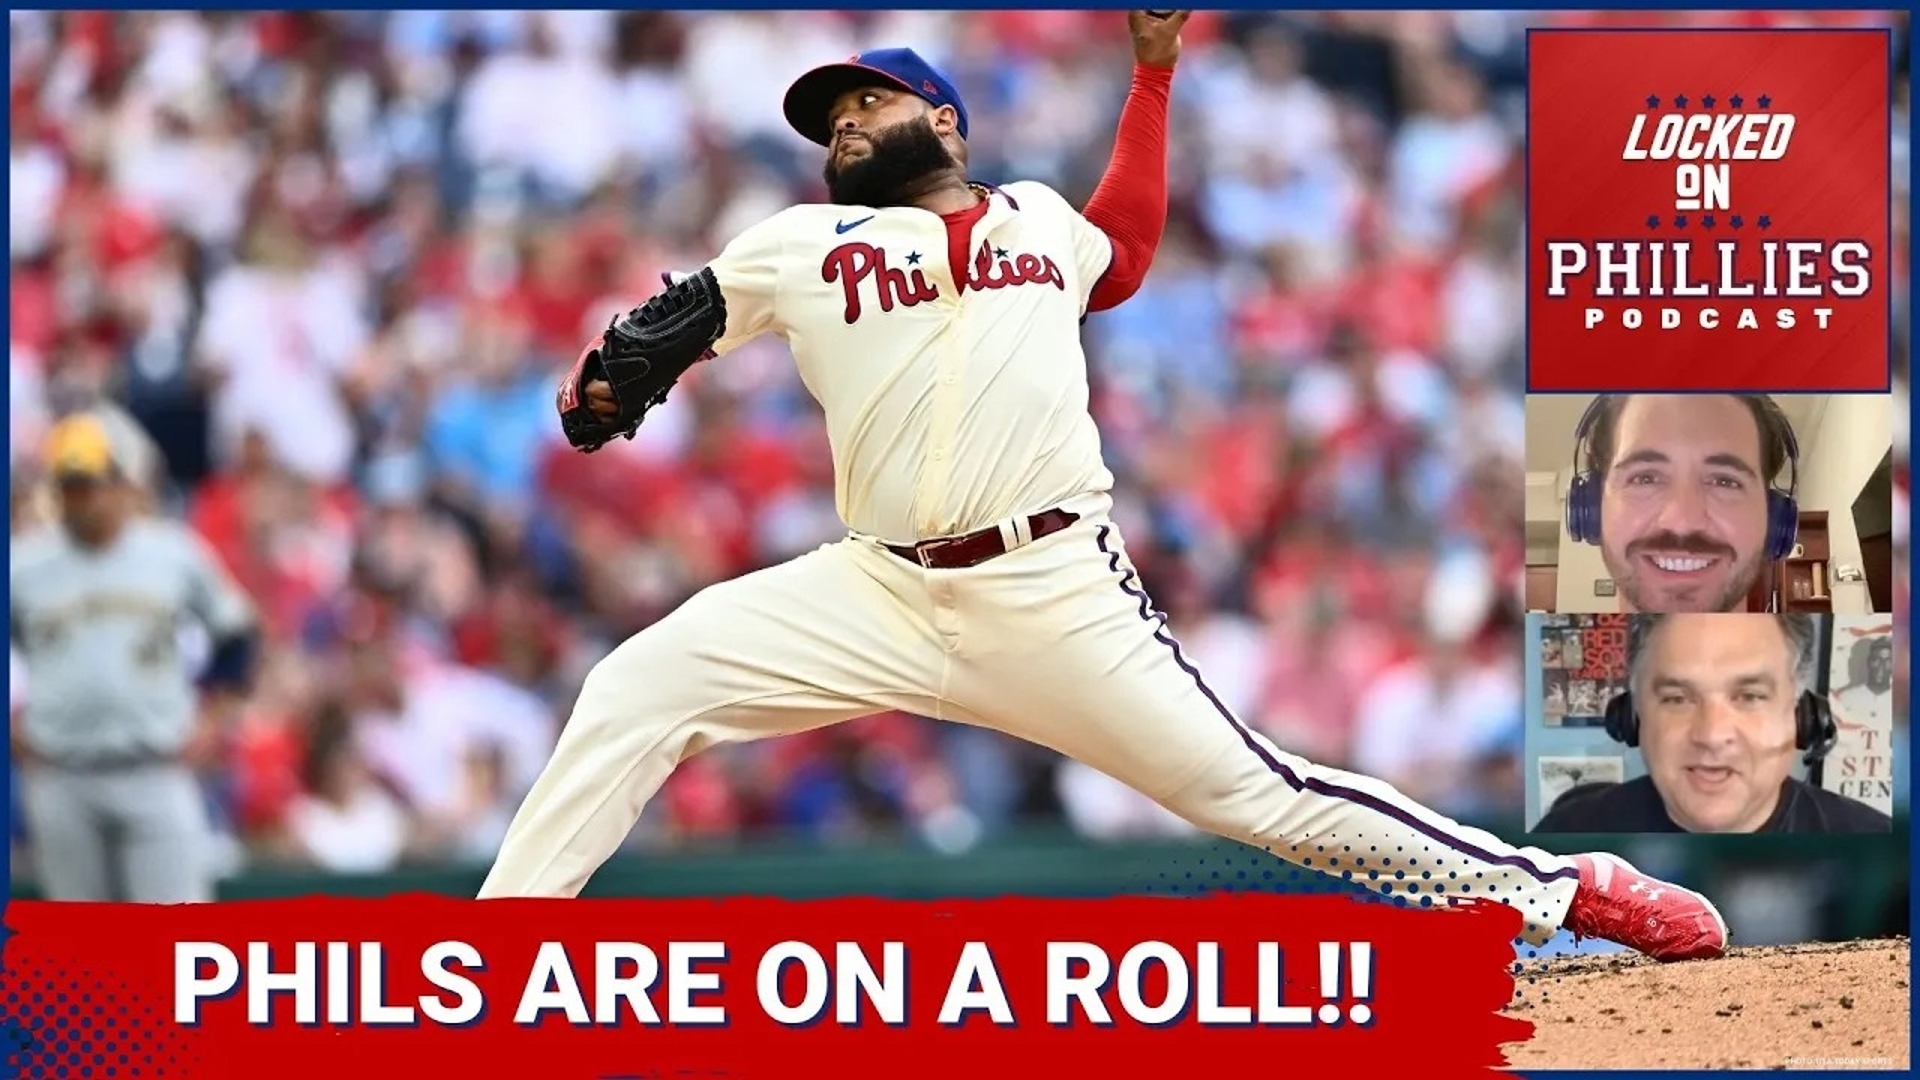 In today's episode, Connor joins Sully of Locked On MLB to discuss the Philadelphia Phillies dominance of the baseball season so far.